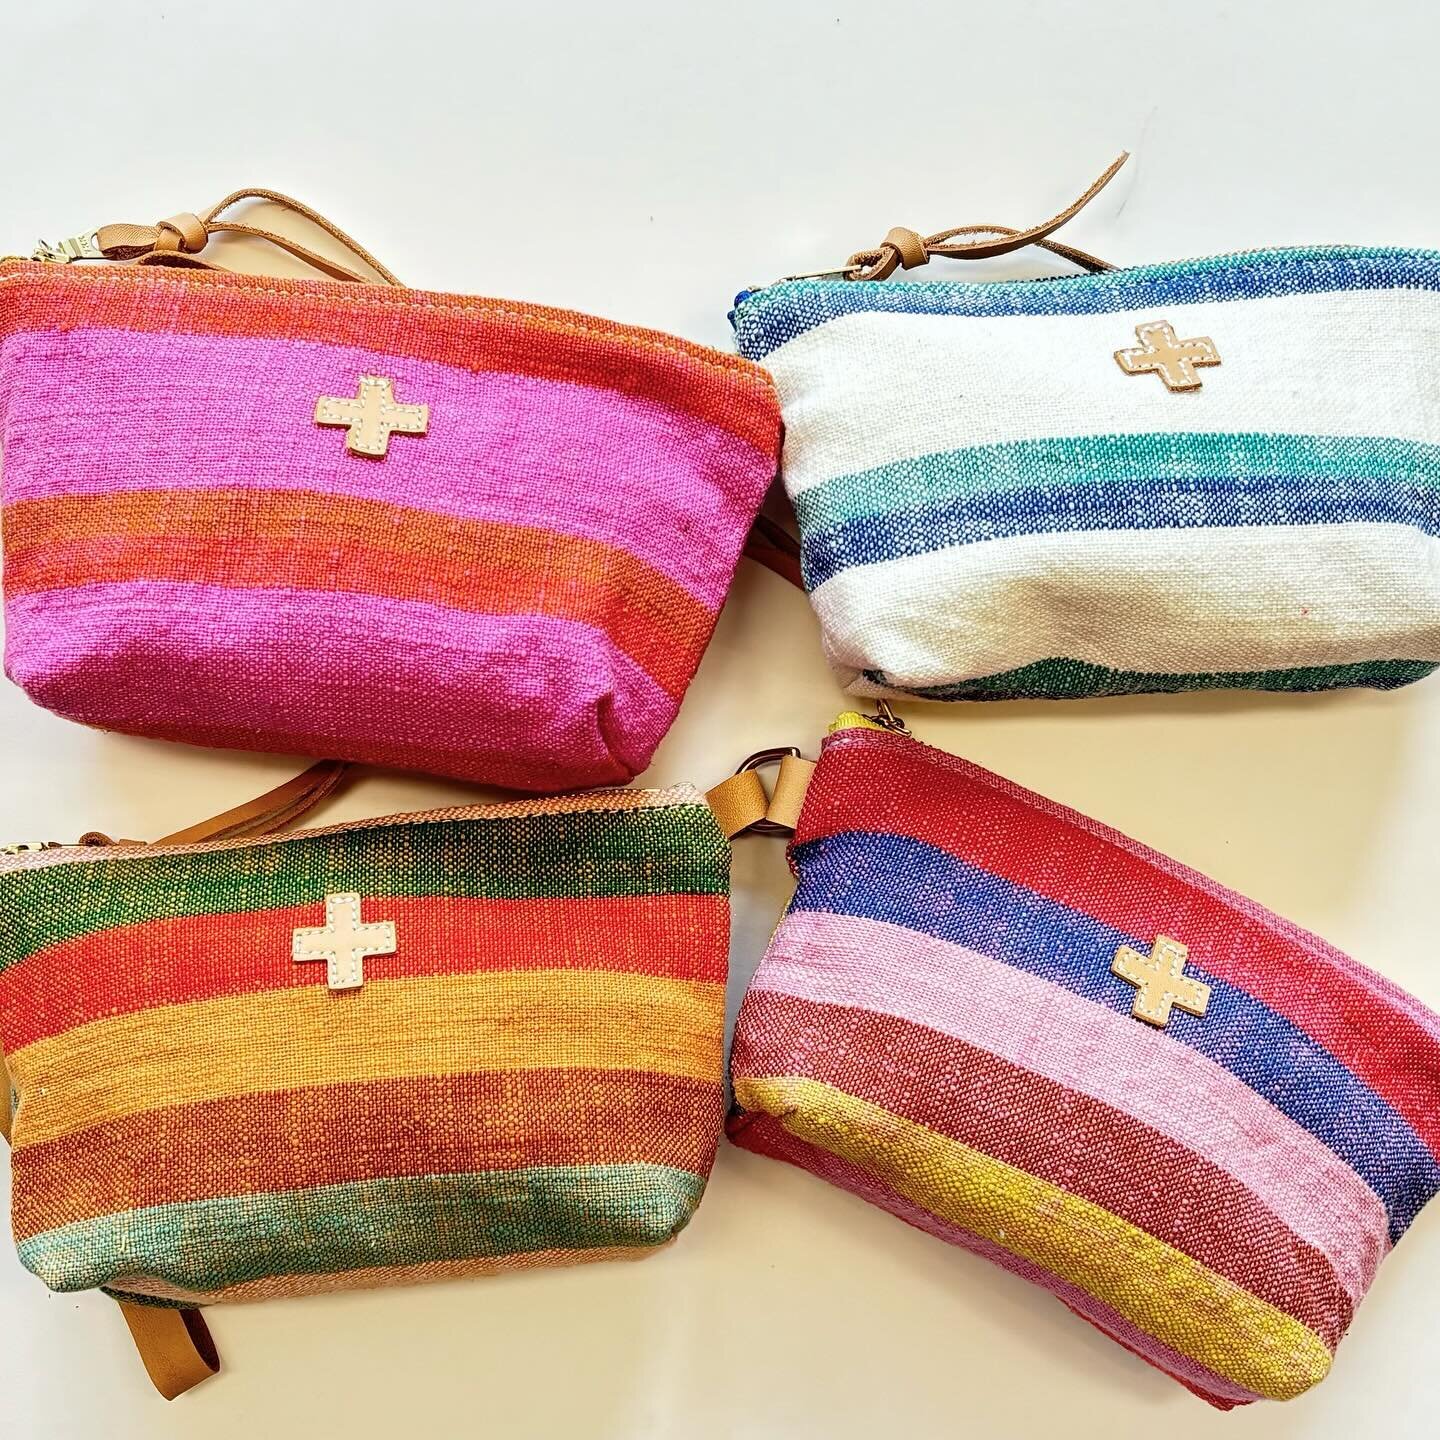 These colorful pouches sold out before we posted them so of course we had to make another batch. Happy spring!